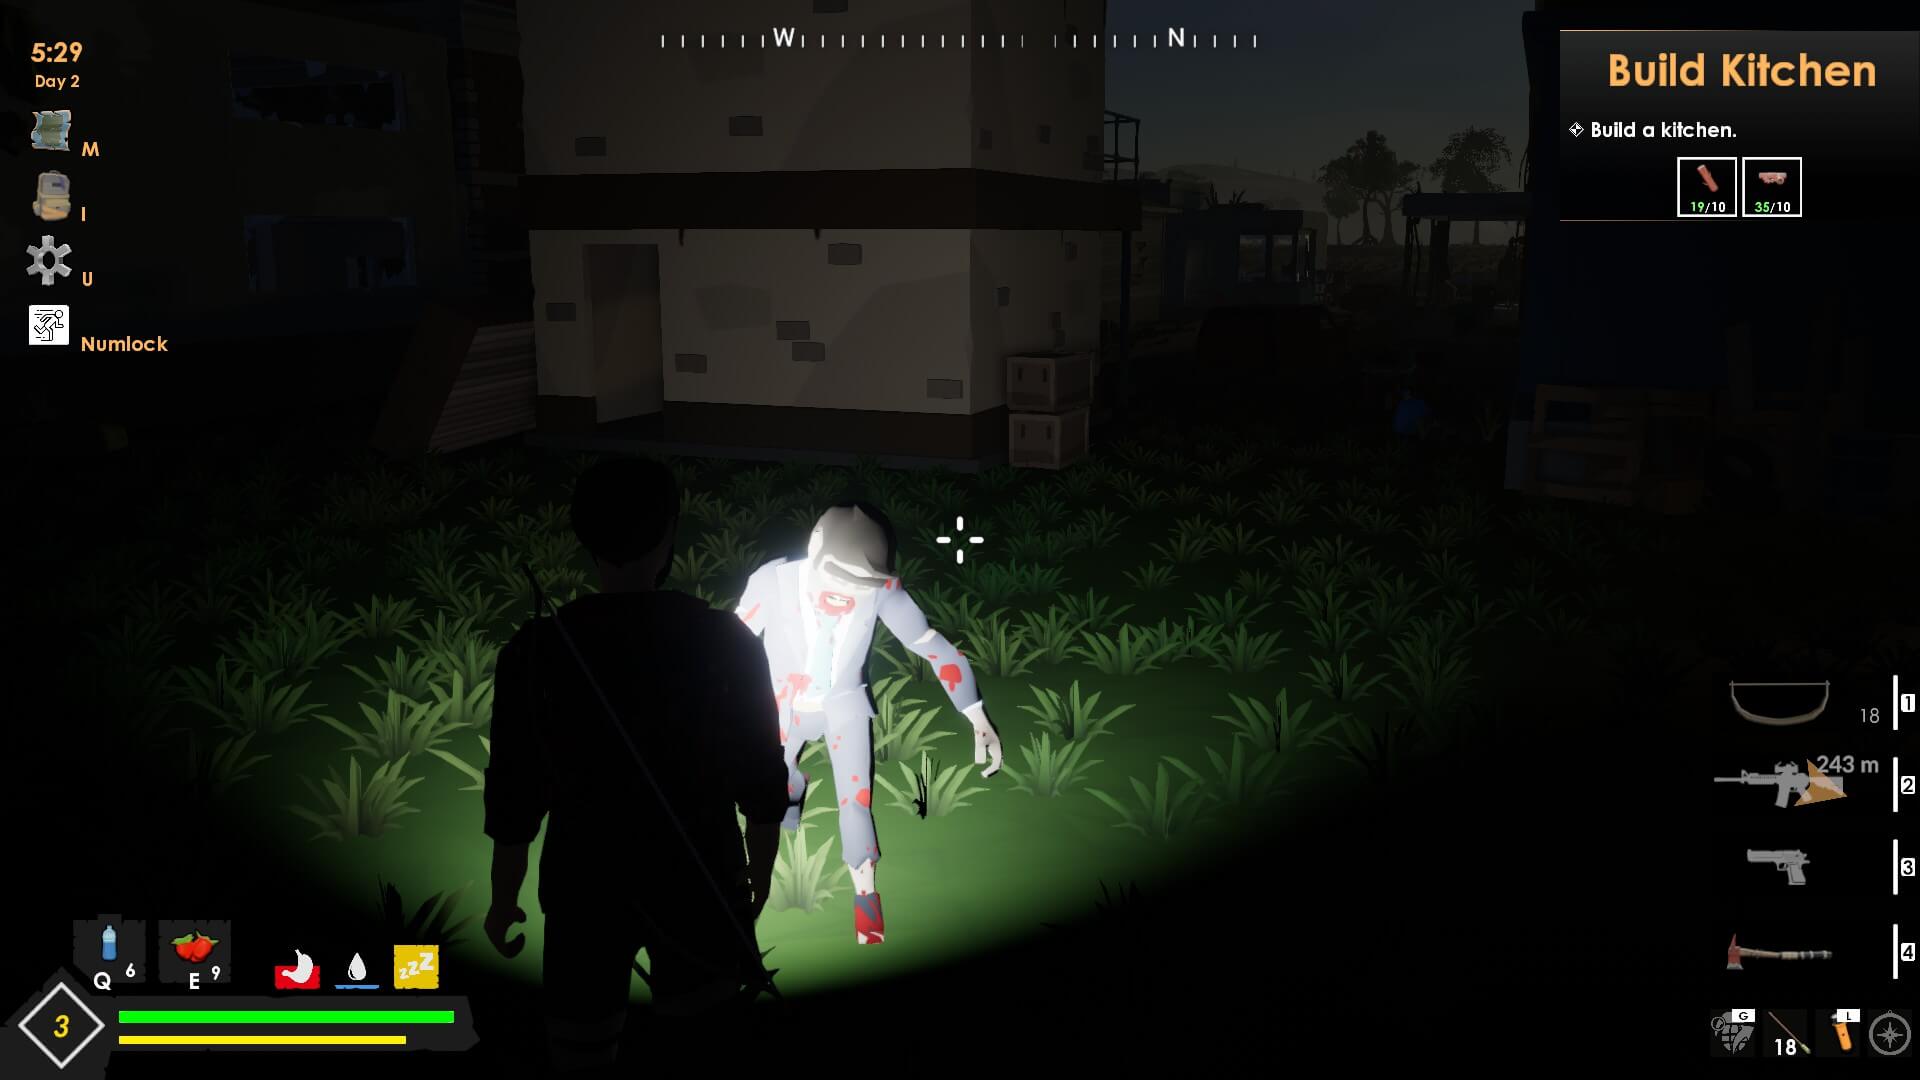 I am shining my torch at an infected who is running at me. There are some crate visible in the background near a building. On the hud you can see my current equipment which consists of a bow, rifle and axe.